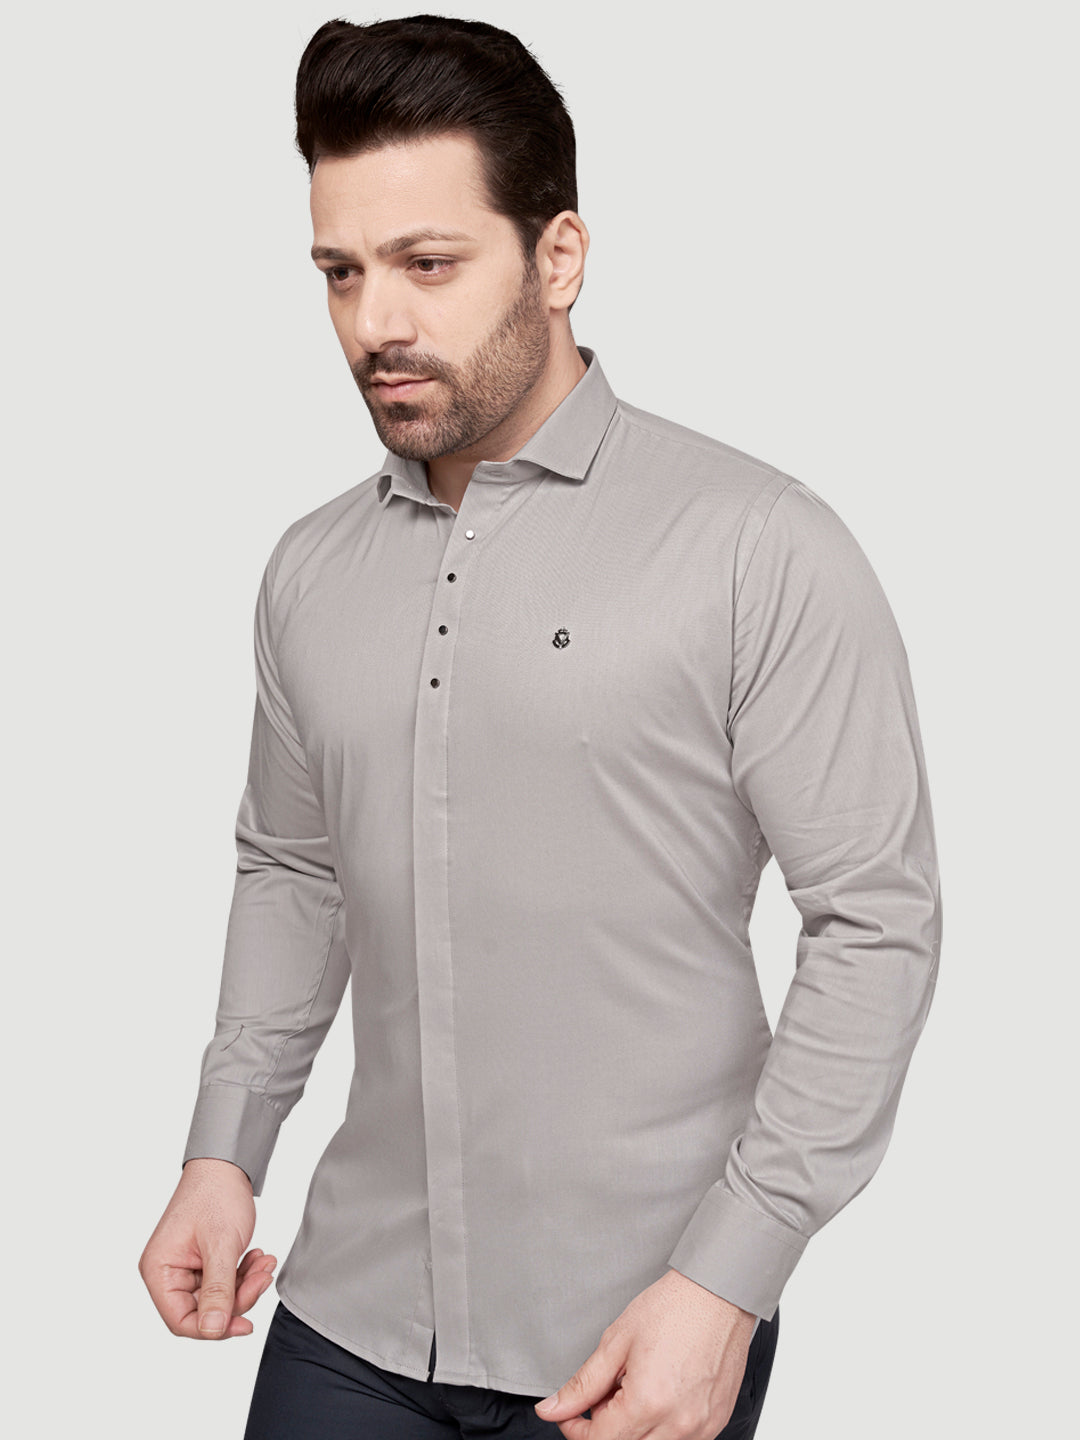 Black & White Designer Shirts with Shimmer Buttons Grey